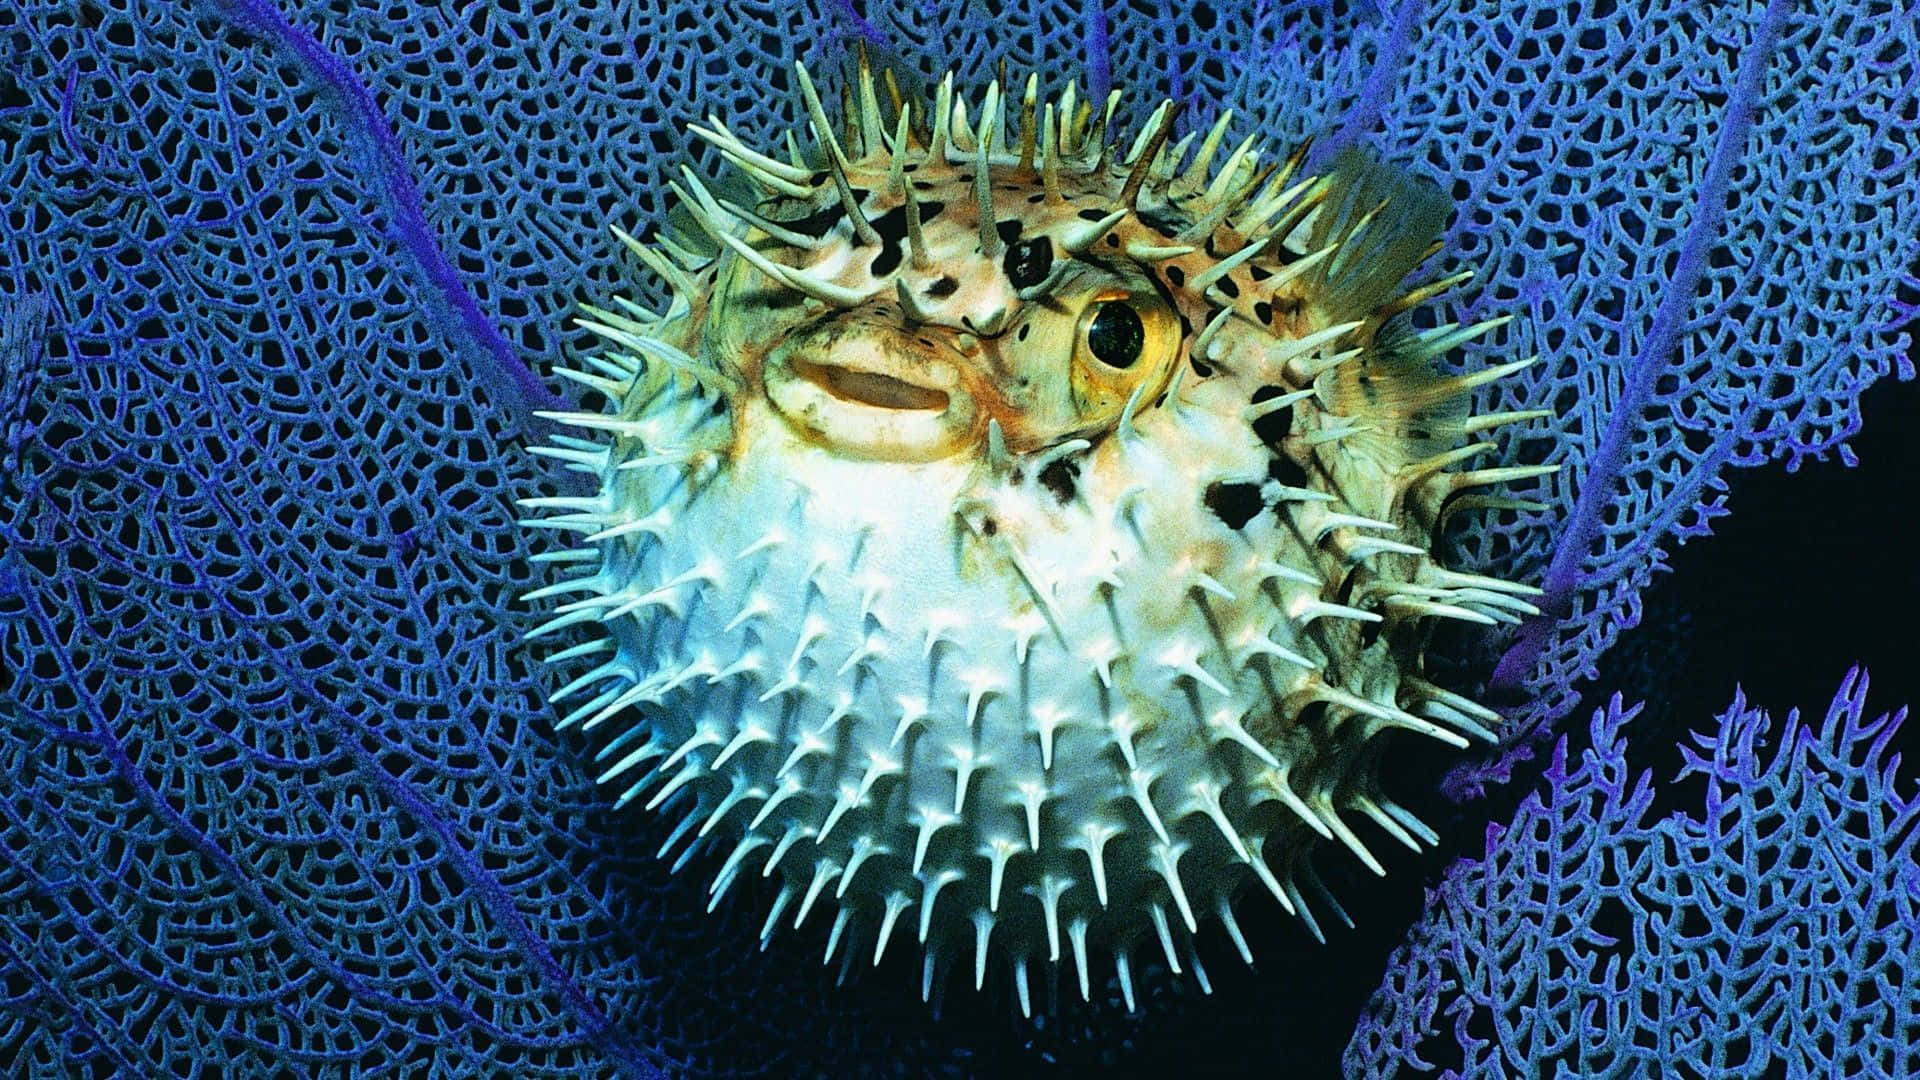 Inflated Pufferfish Amidst Coral Reefs.jpg Background